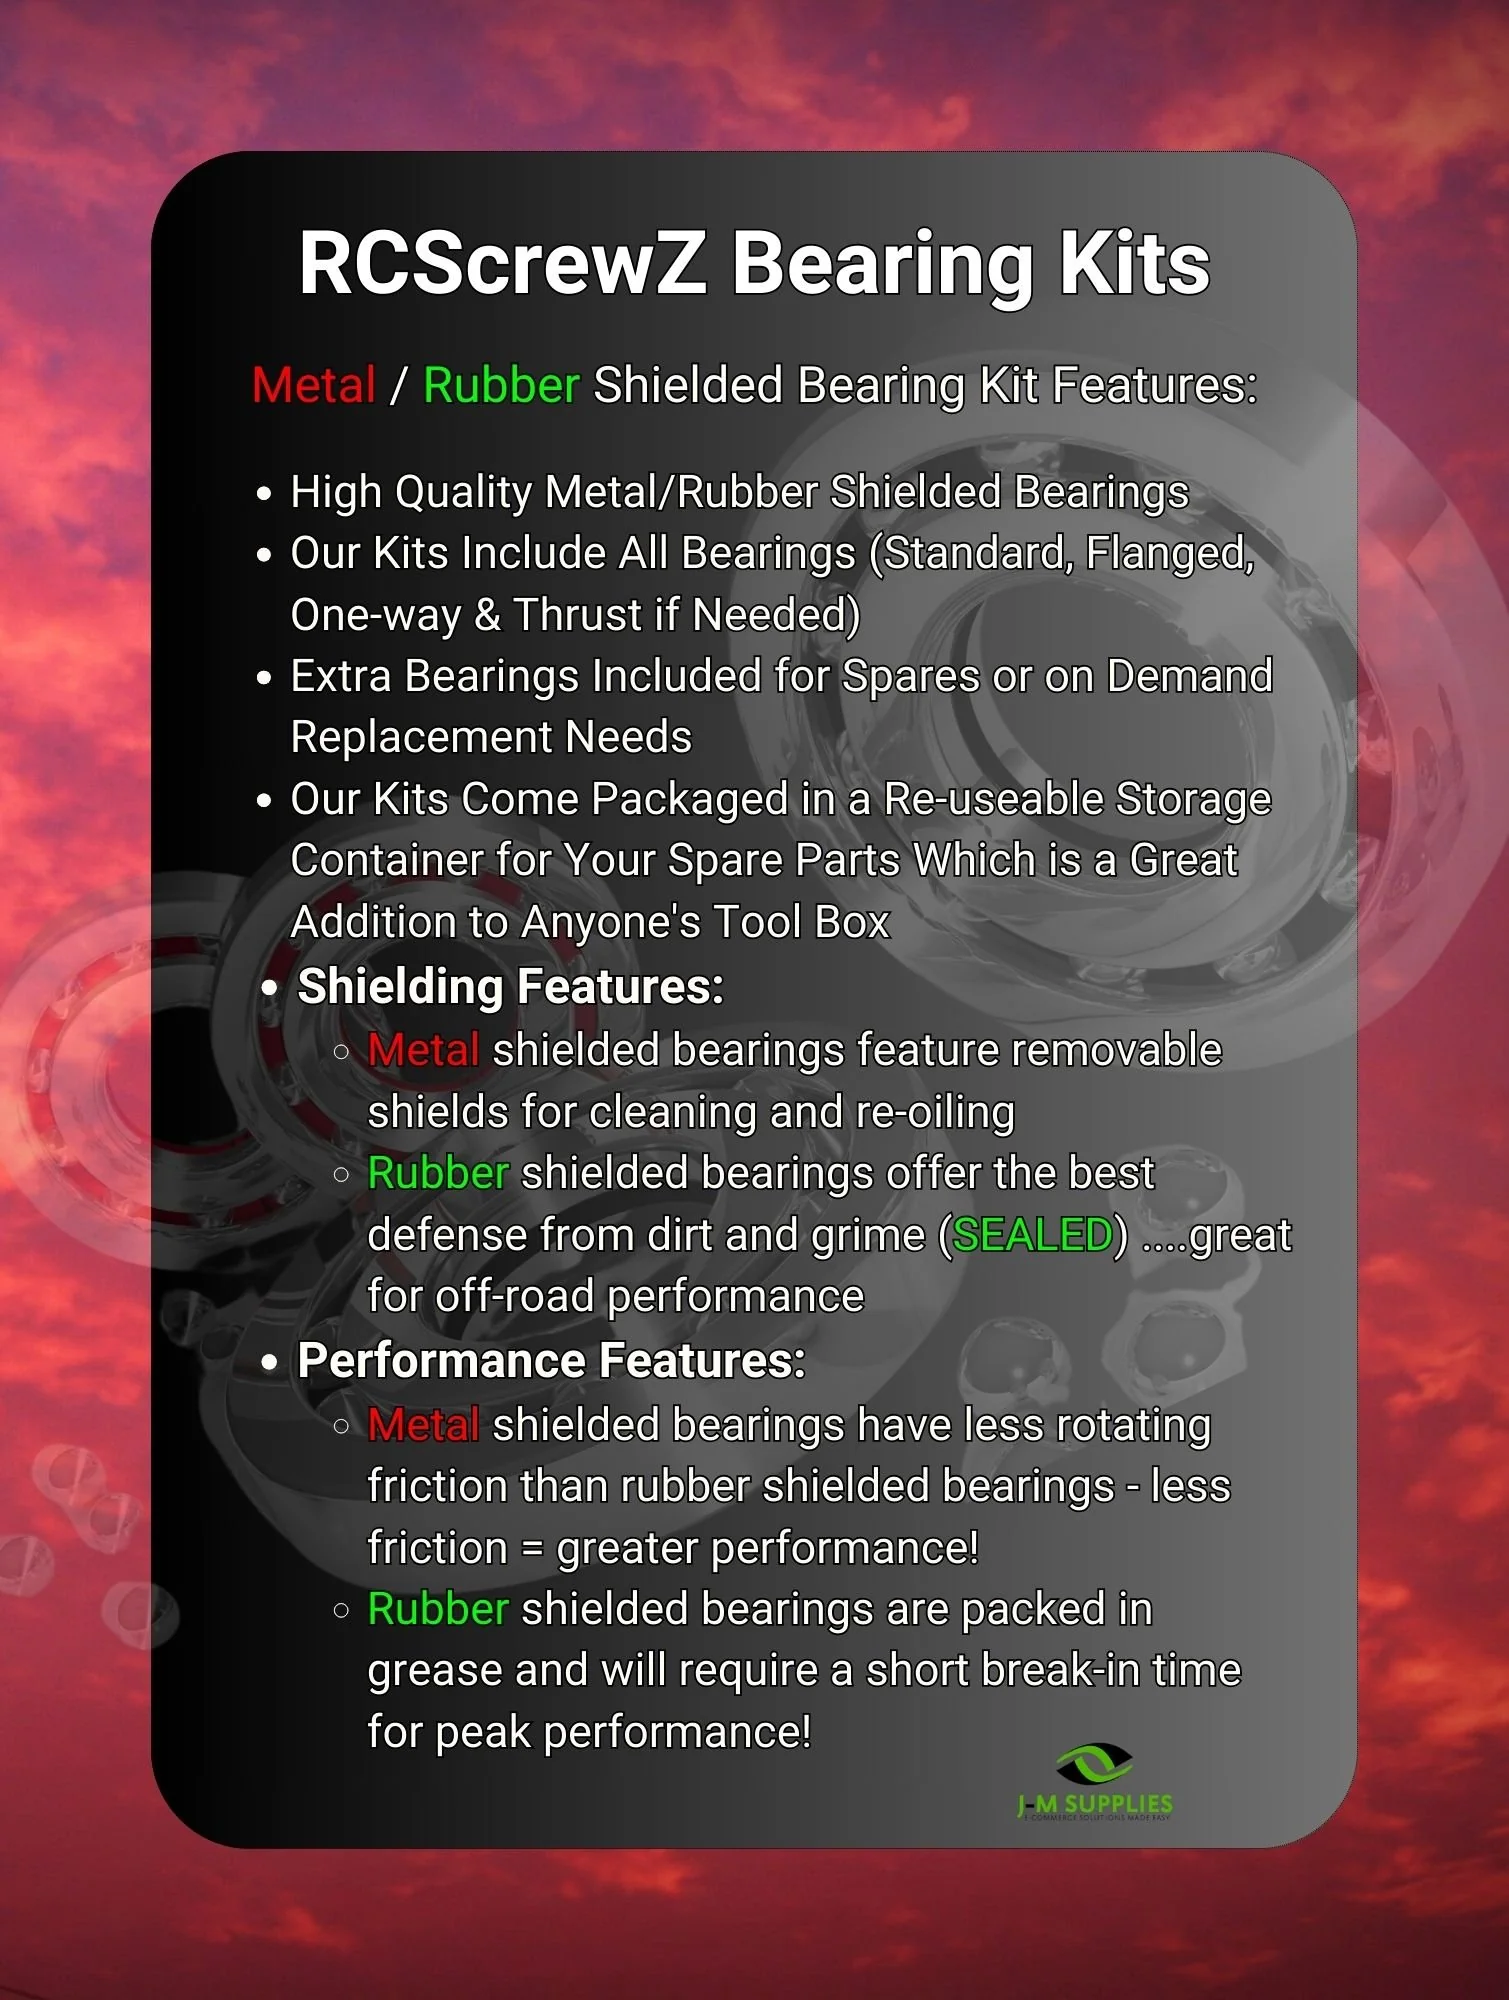 RCScrewZ Metal Shielded Bearing Kit ser032b for Serpent S411 ERYX 4.0 #400017/18 - Picture 10 of 12